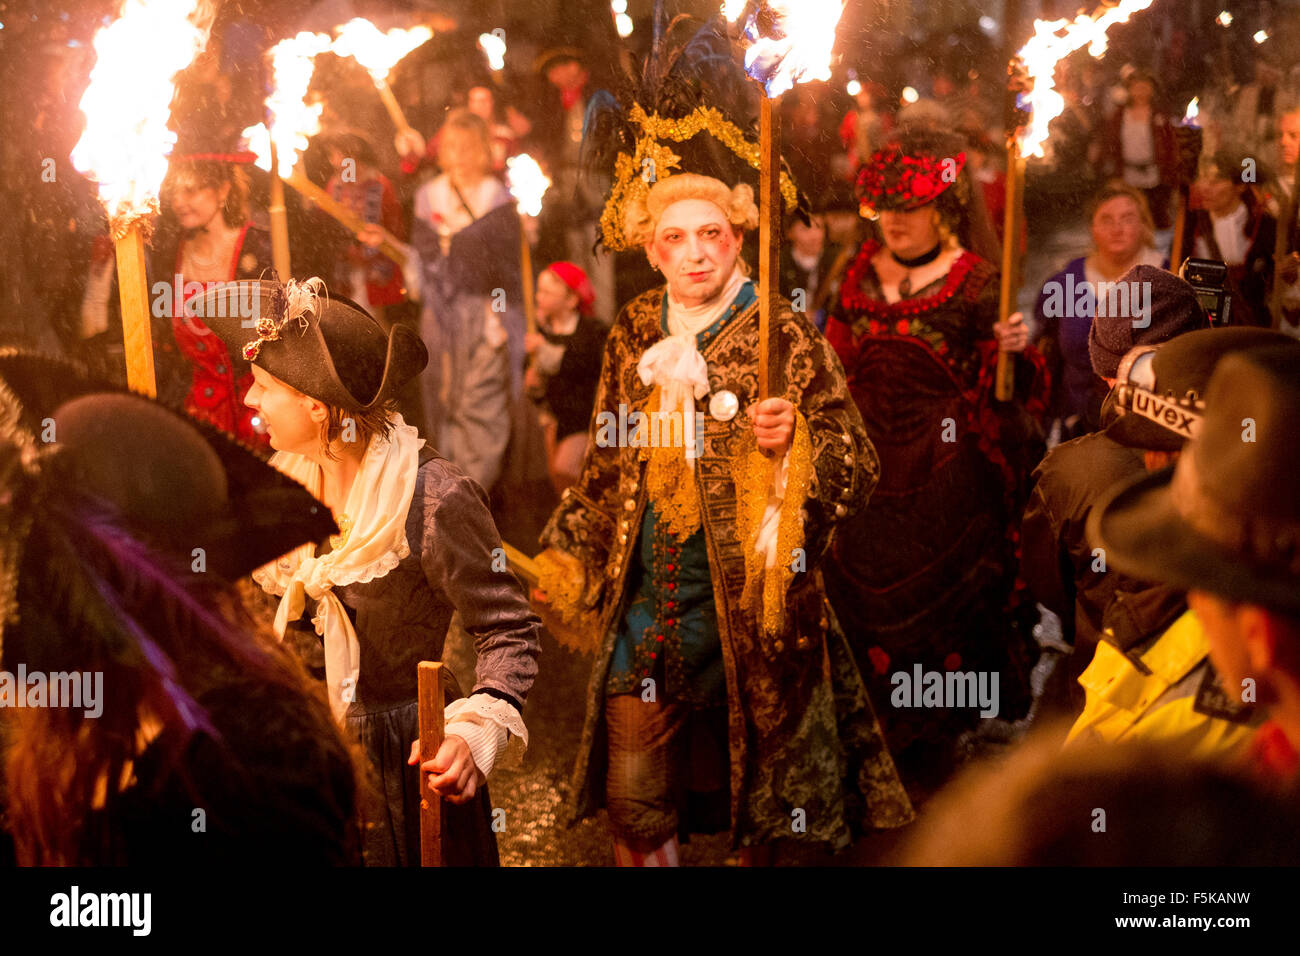 Lewes, East Sussex, UK. 5th November, 2015. With over 4000 people in costume in processions and 26,000 flaming torches, the Lewes Bonfire Night celebrations brought an anticipated 20,000 visitors into the town despite the continual rain. These are members of the Cliffe bonfire society. Credit:  Scott Hortop/Alamy Live News Stock Photo